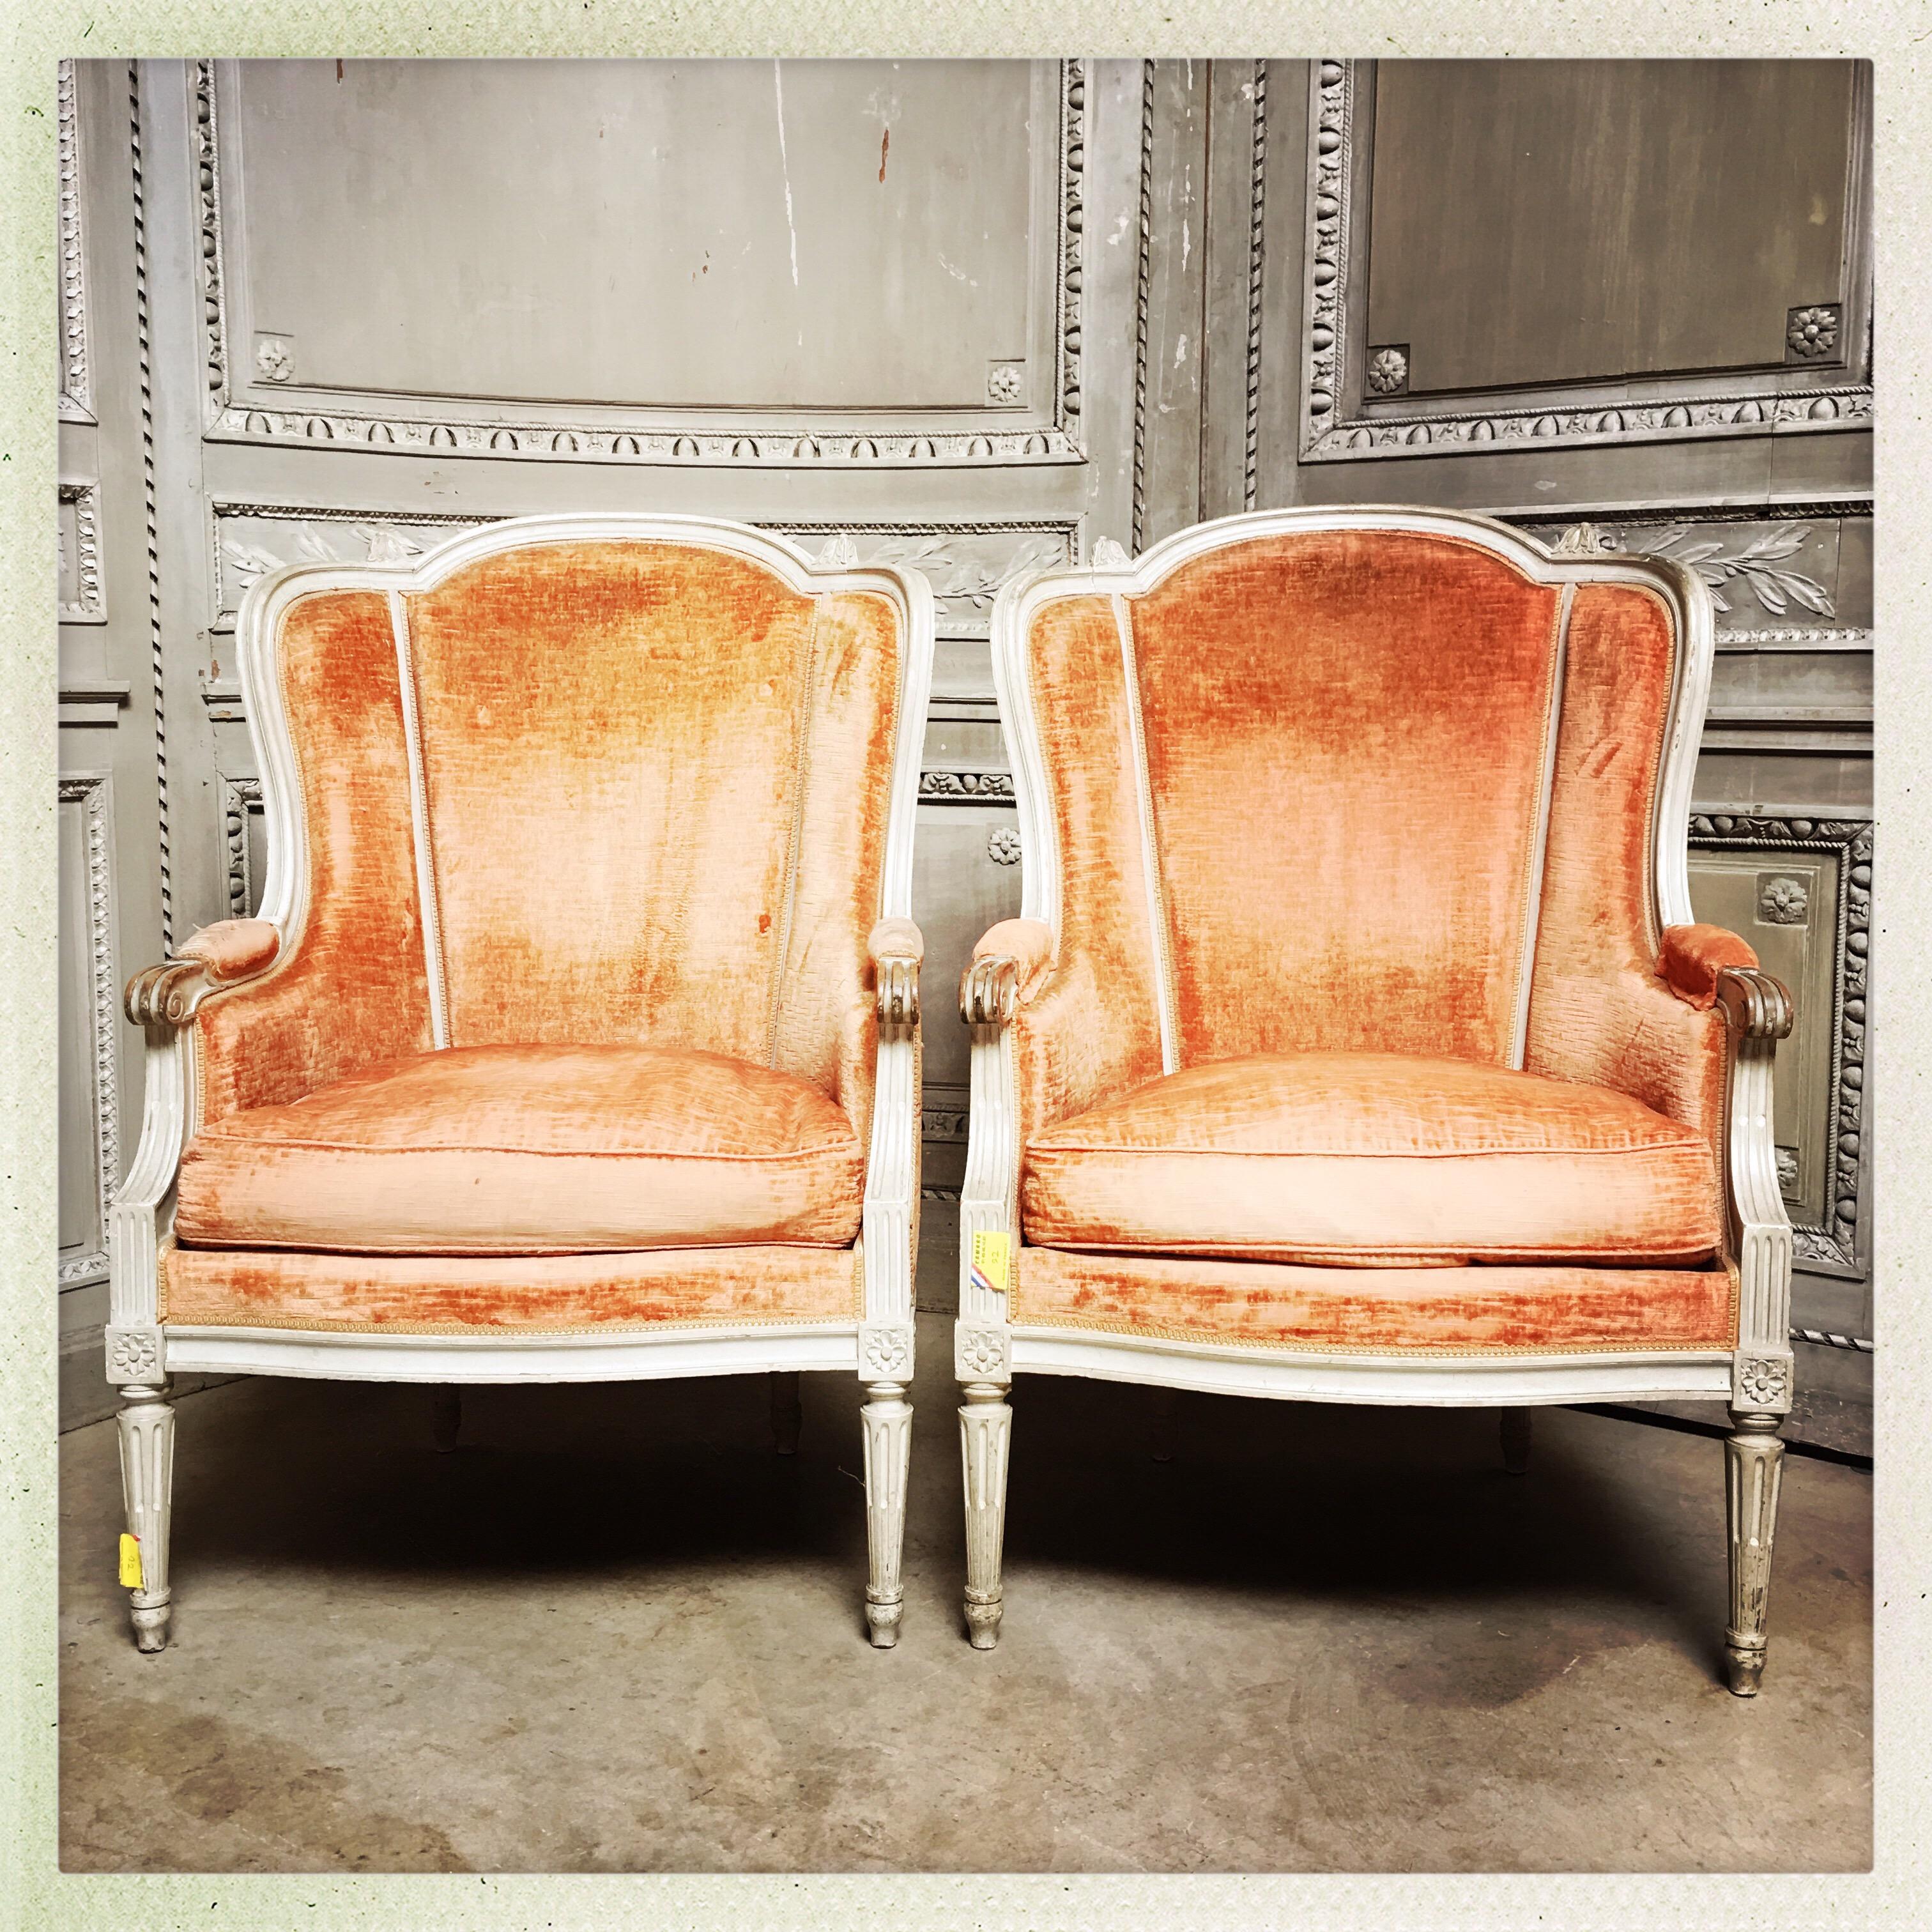 A pair of large French Louis XVI style bergeres with a painted gray finish.